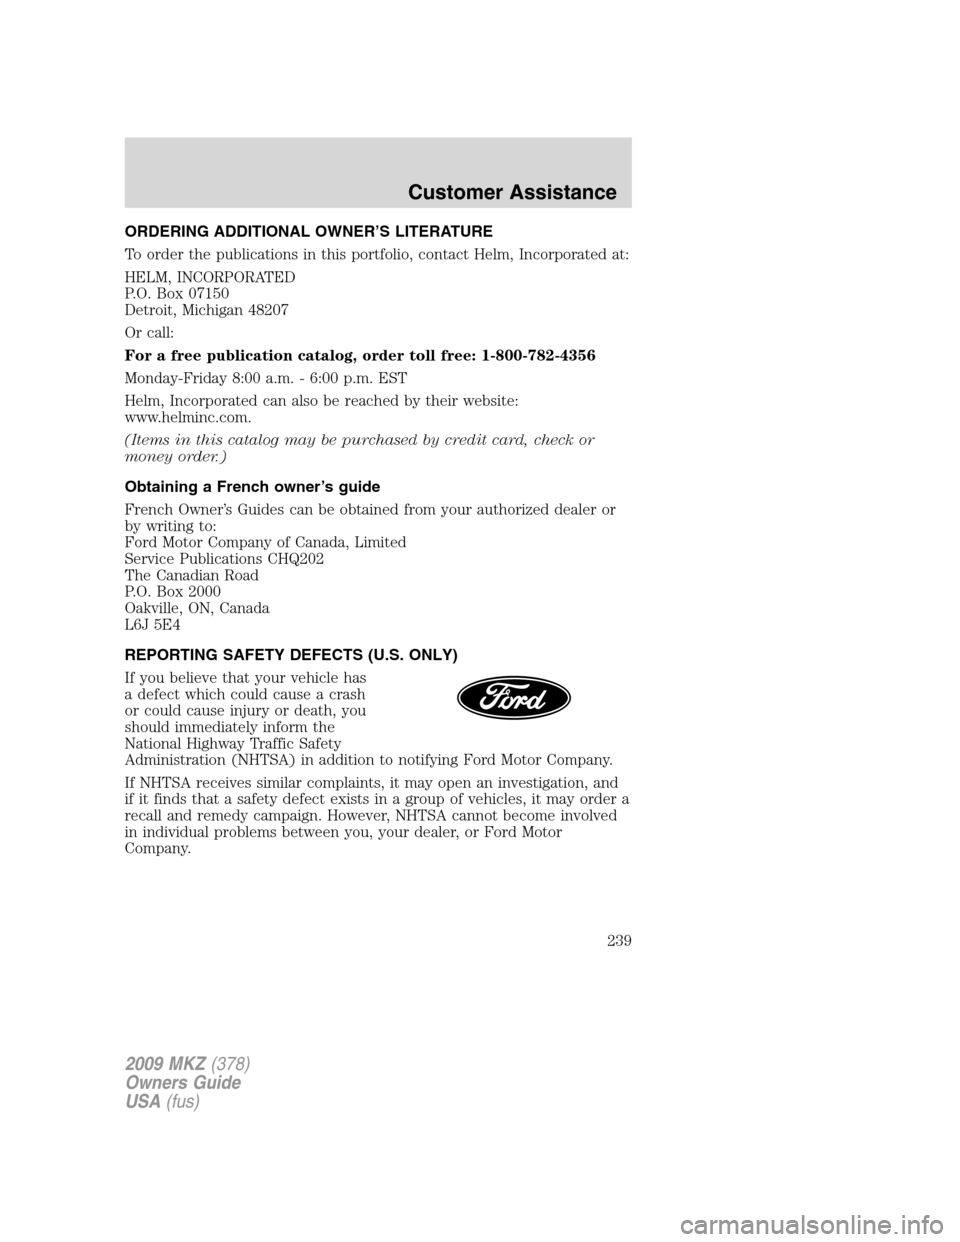 LINCOLN MKZ 2009 Service Manual ORDERING ADDITIONAL OWNER’S LITERATURE
To order the publications in this portfolio, contact Helm, Incorporated at:
HELM, INCORPORATED
P.O. Box 07150
Detroit, Michigan 48207
Or call:
For a free publi